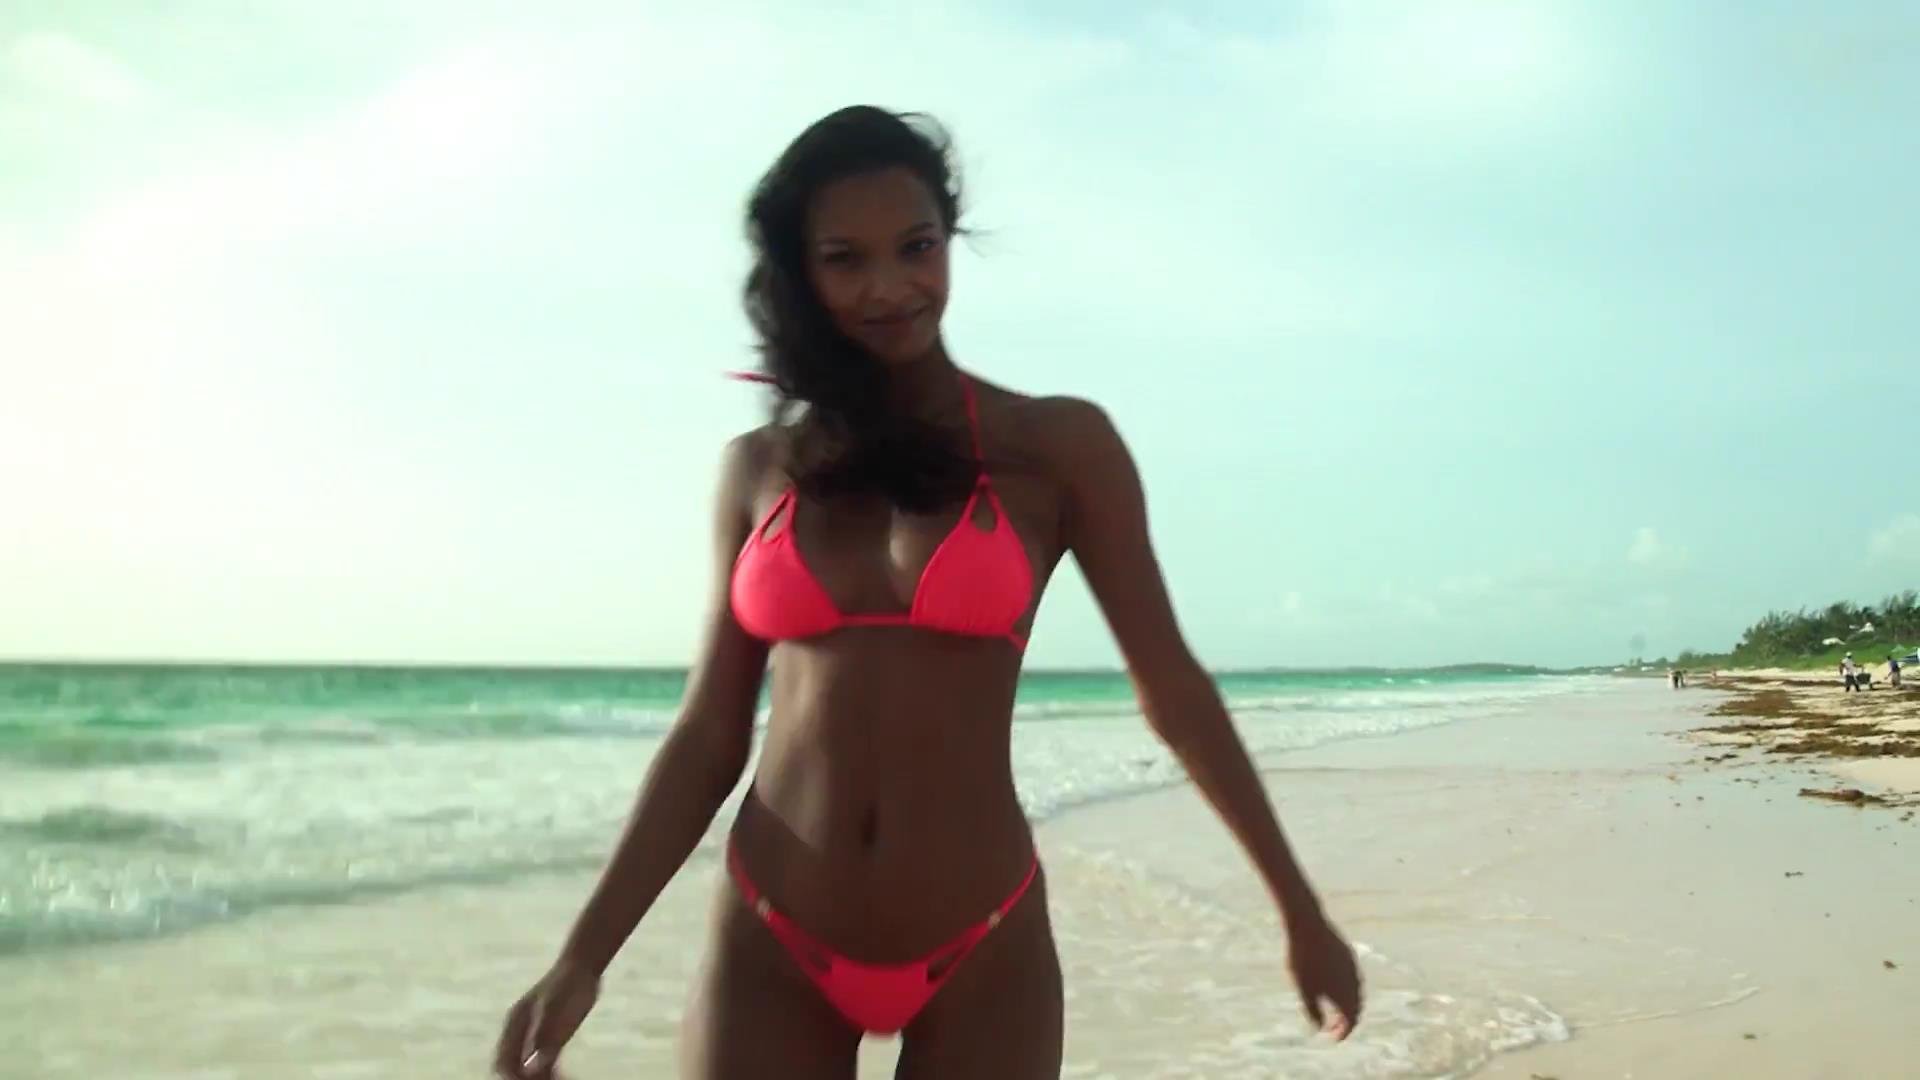 Lais Ribeiro Intimates - 2018 Sports Illustrated Swimsuit Issue (35 Pics + Gifs & Video)